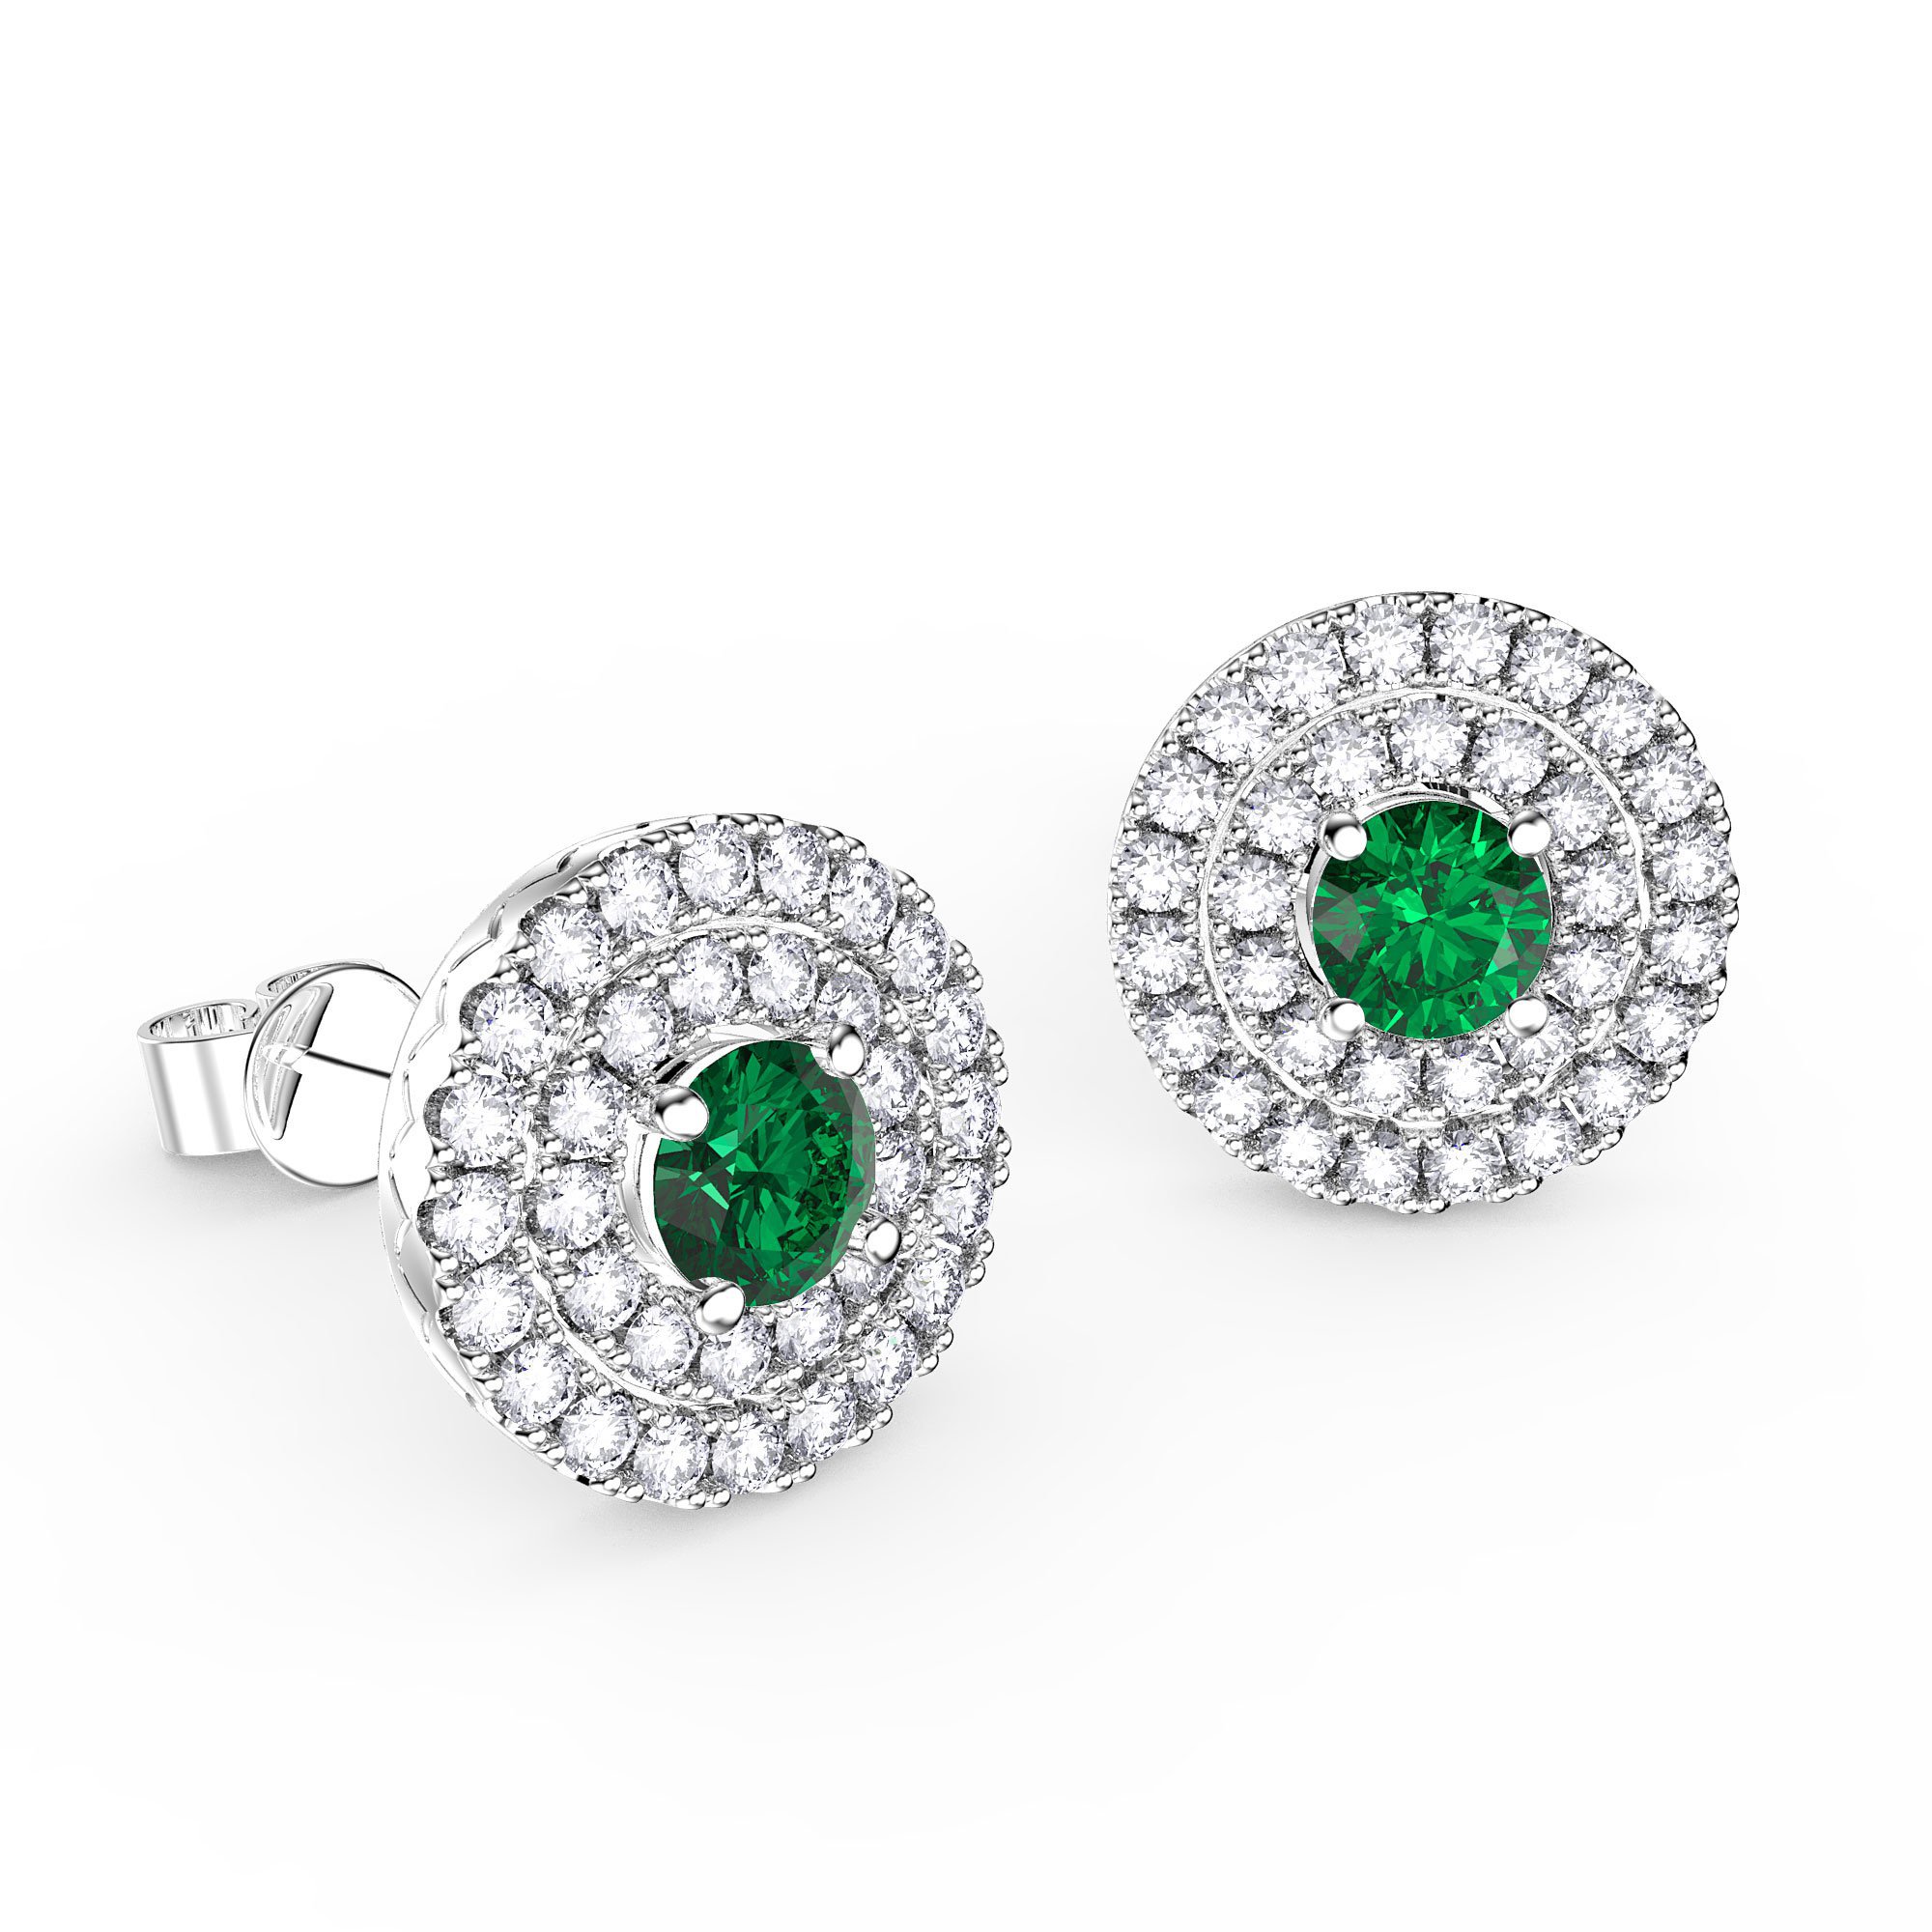 Fusion Emerald and Diamond Halo 18K White Gold Stud Earrings